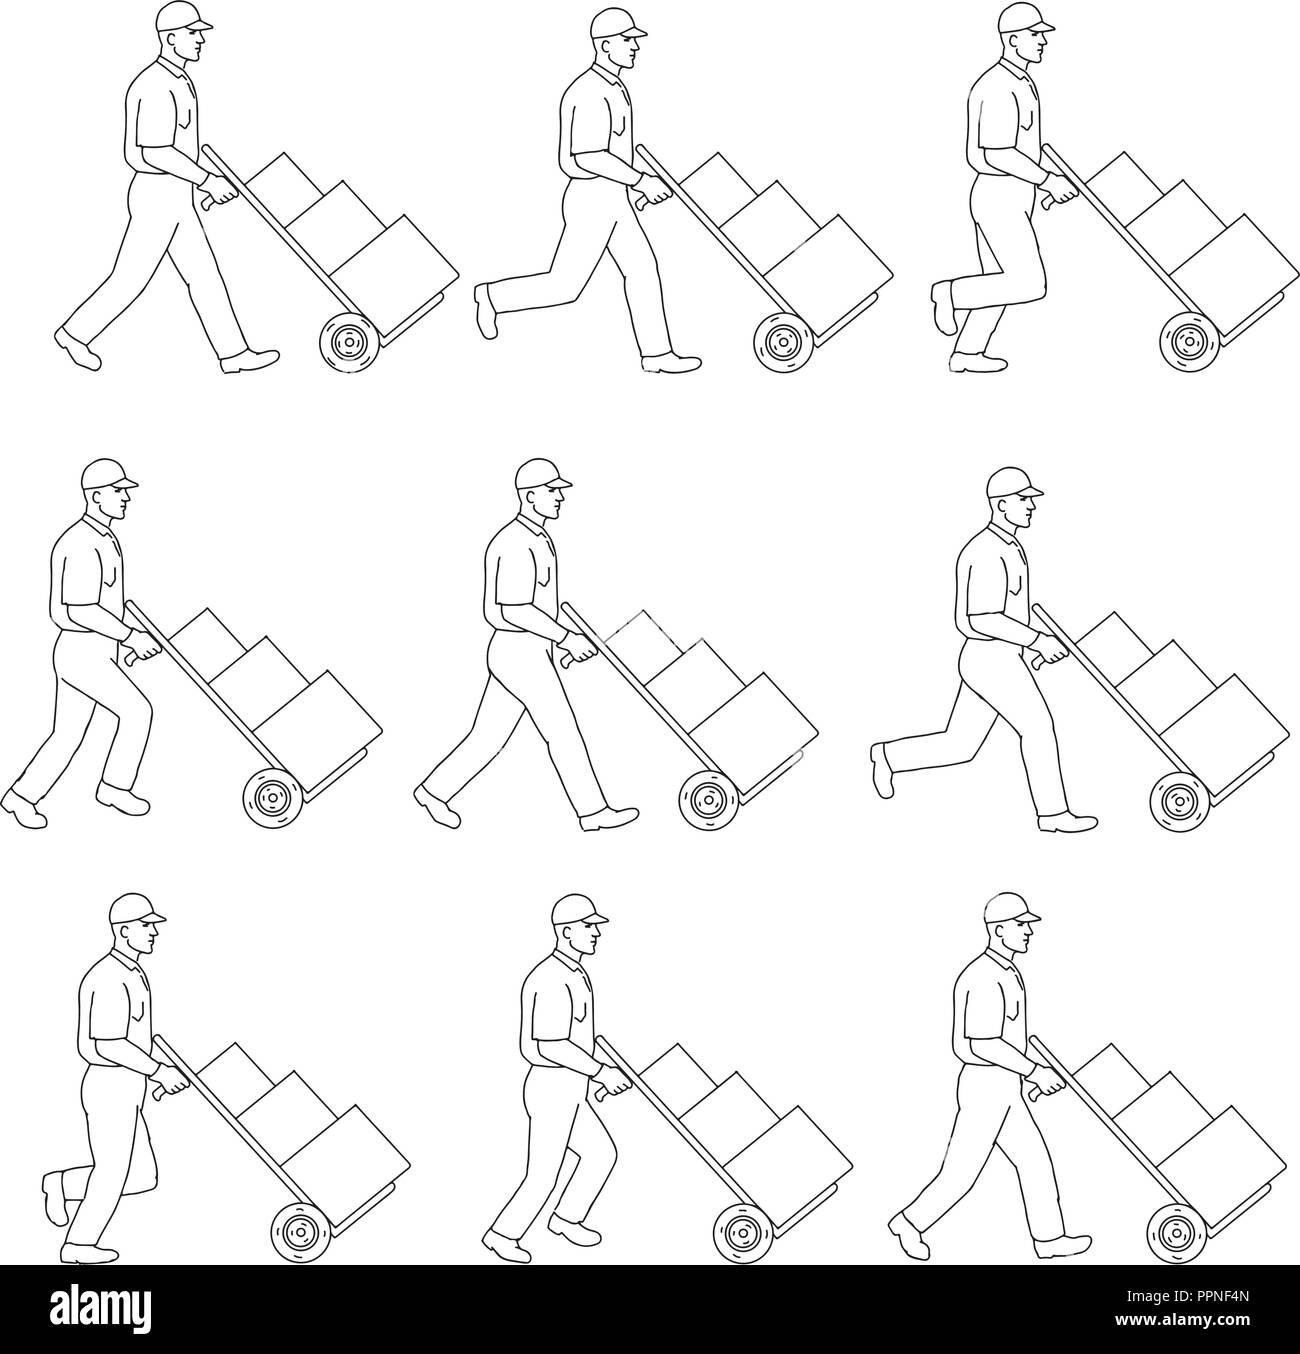 Drawing sketch style illustration of a delivery worker walking pushing a hand cart, pushcart or hand trolley with boxes in walk cycle sequence on isol Stock Vector